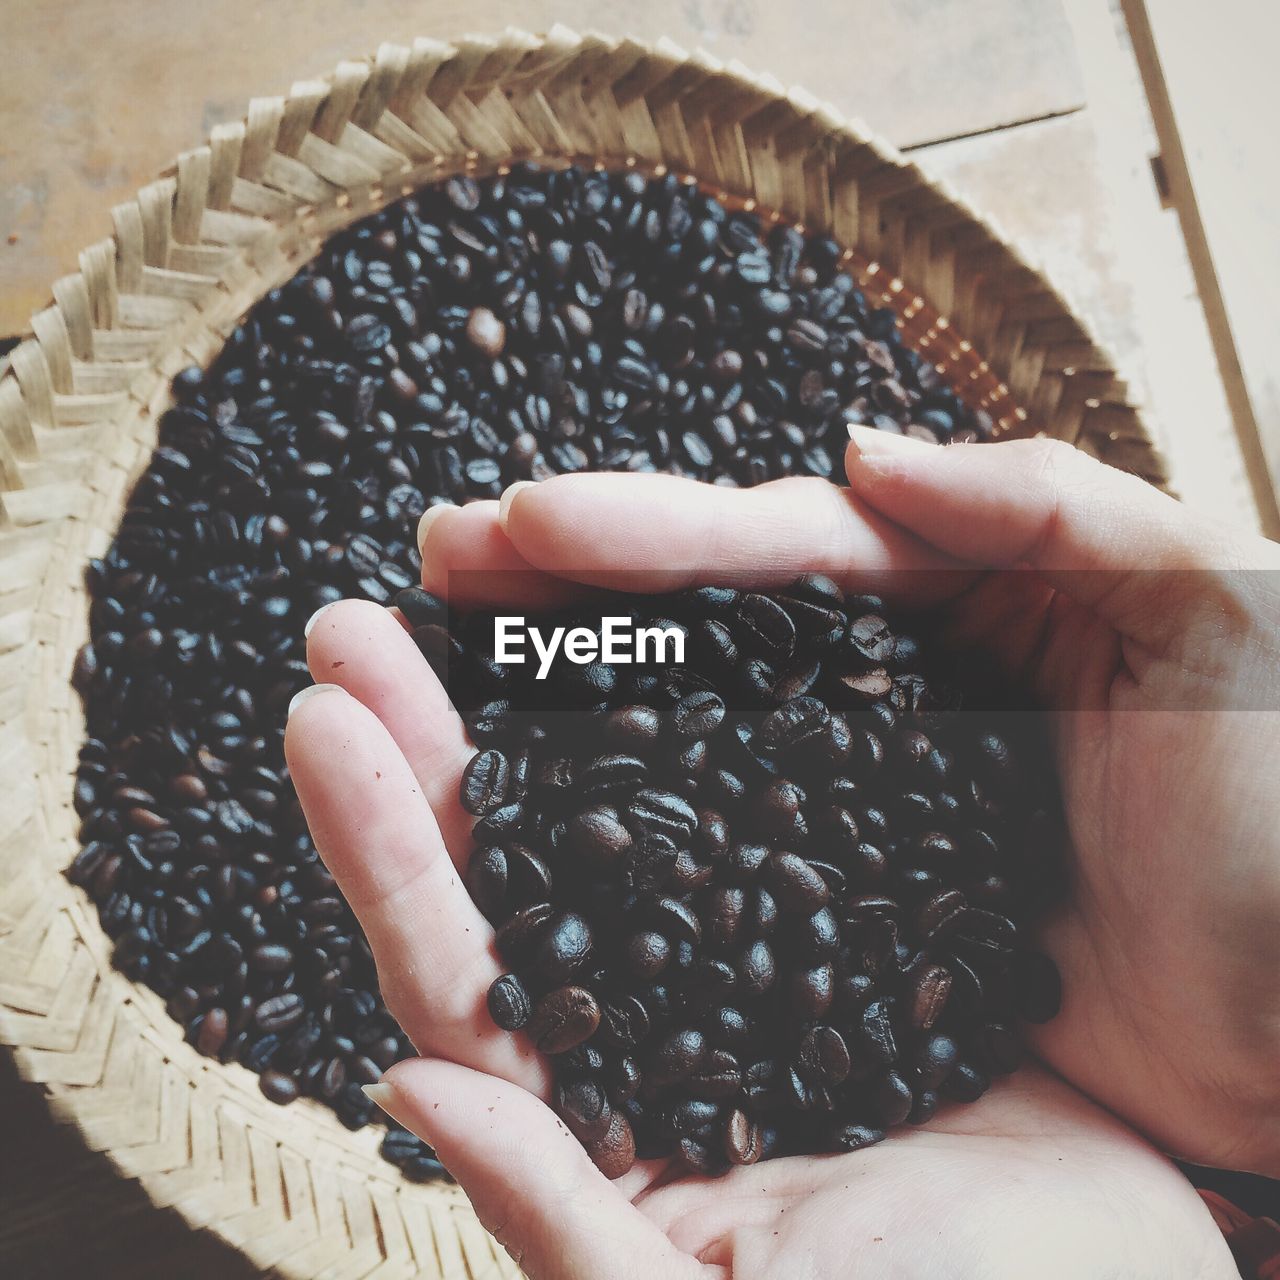 Cropped hands of person holding roasted coffee beans